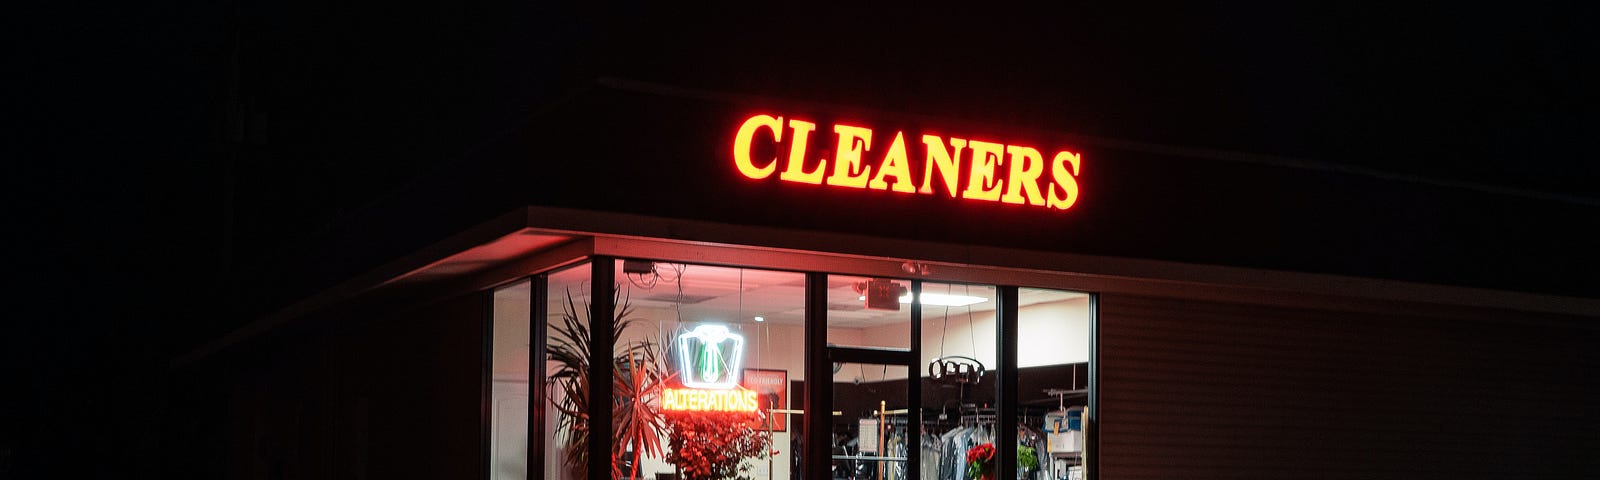 Dry cleaner’s shop